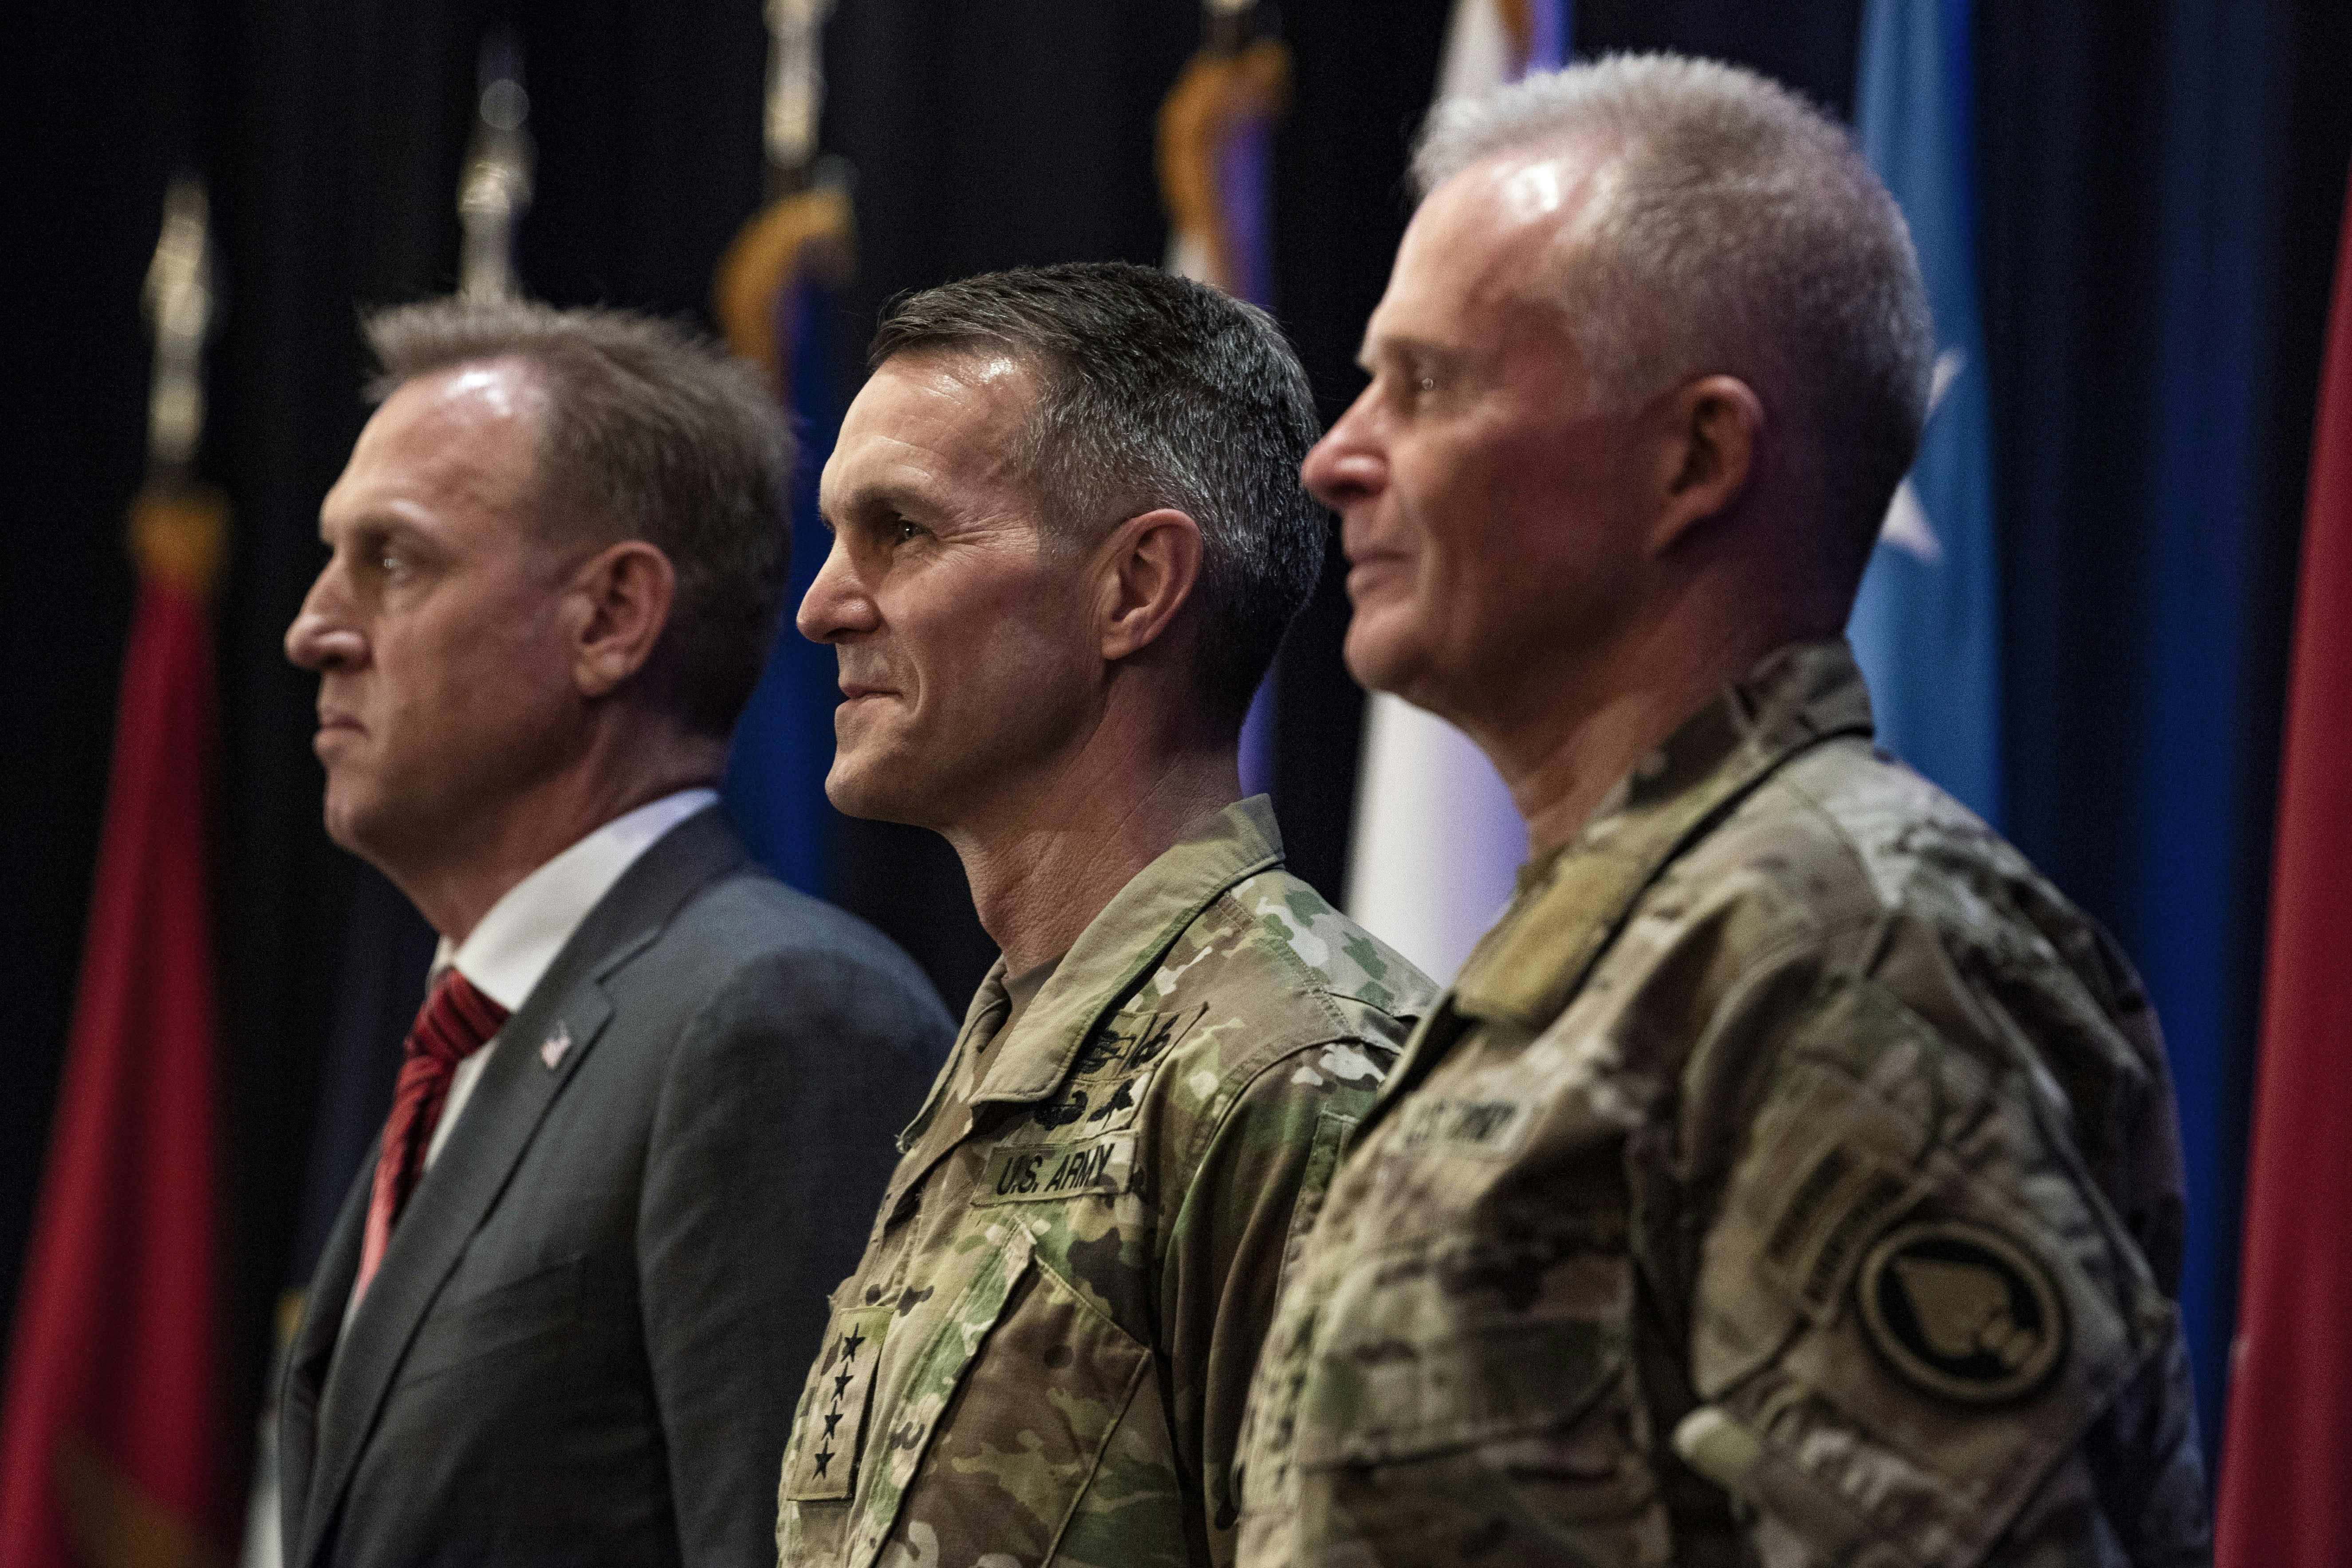 U.S. Acting Secretary of Defense Patrick M. Shanahan presides over the U.S. Special Operations Command change of command, Tampa, Florida, March 29, 2019. U.S. Army Gen. Richard D. Clarke (center) took command from U.S. Army Gen. Raymond A. Thomas III (right). (DoD photo by Lisa Ferdinando)